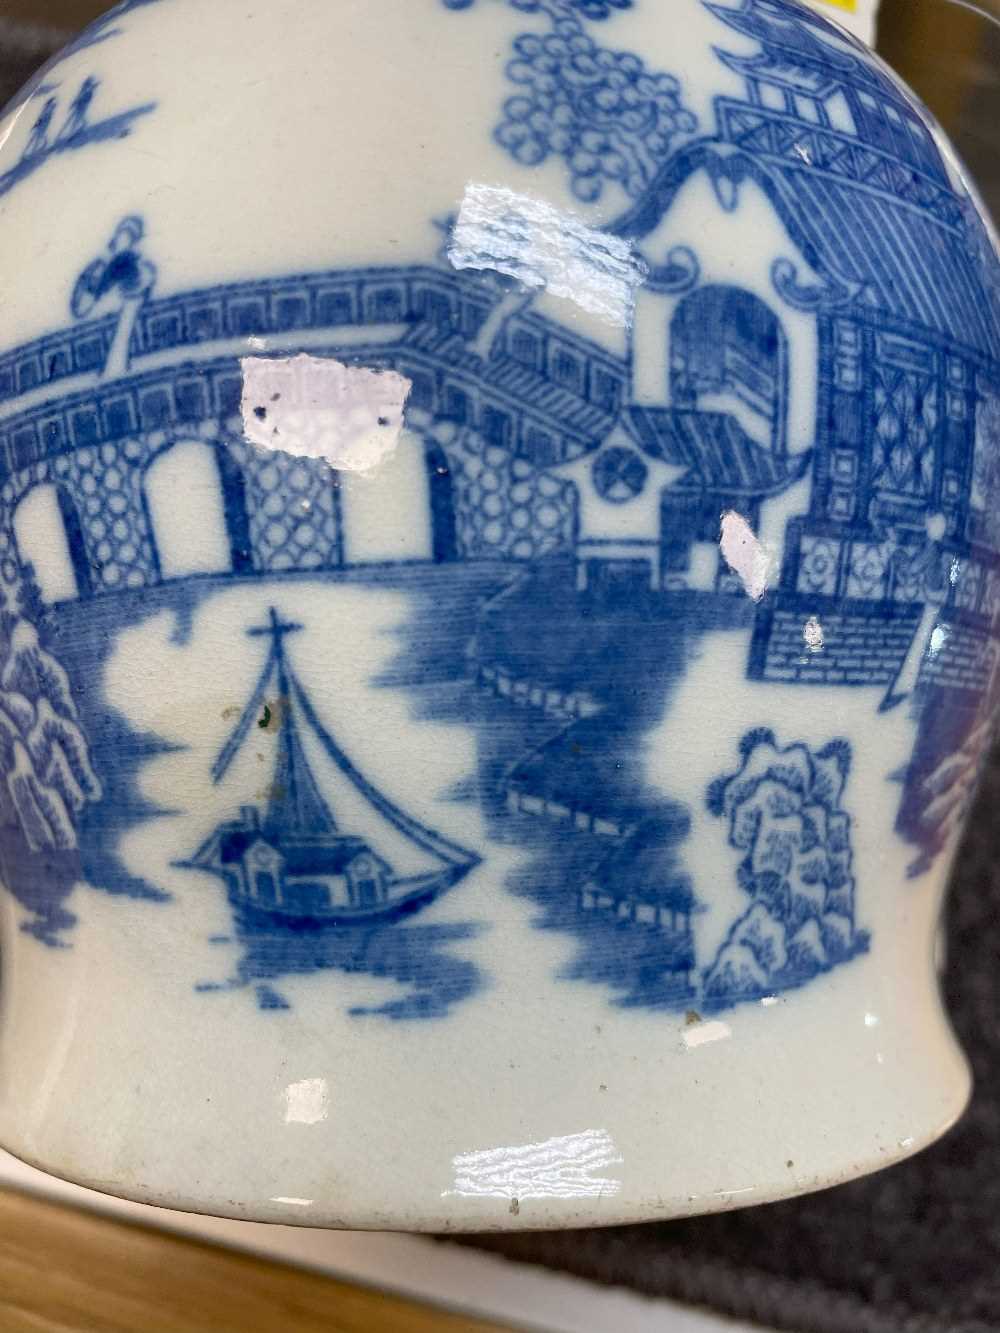 SWANSEA CAMBRIAN PEARLWARE PUZZLE JUG circa 1810, printed in blue with the 'Longbridge' pattern, - Image 16 of 20